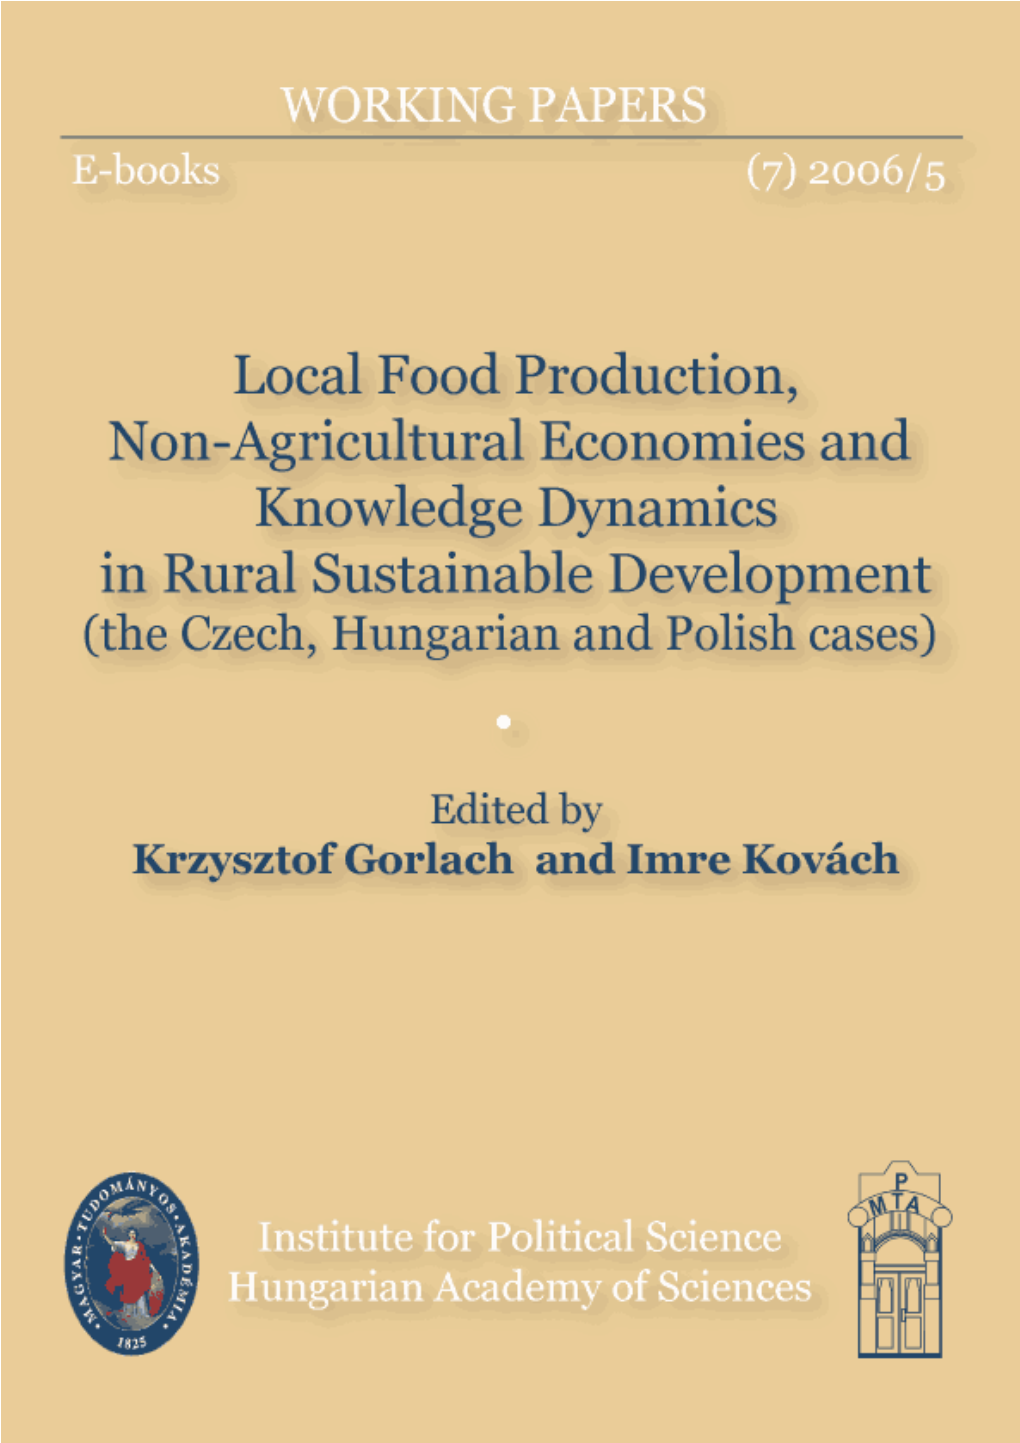 Local Food Production, Non-Agricultural Economies and Knowledge Dynamics in the Rural Sustainable Development